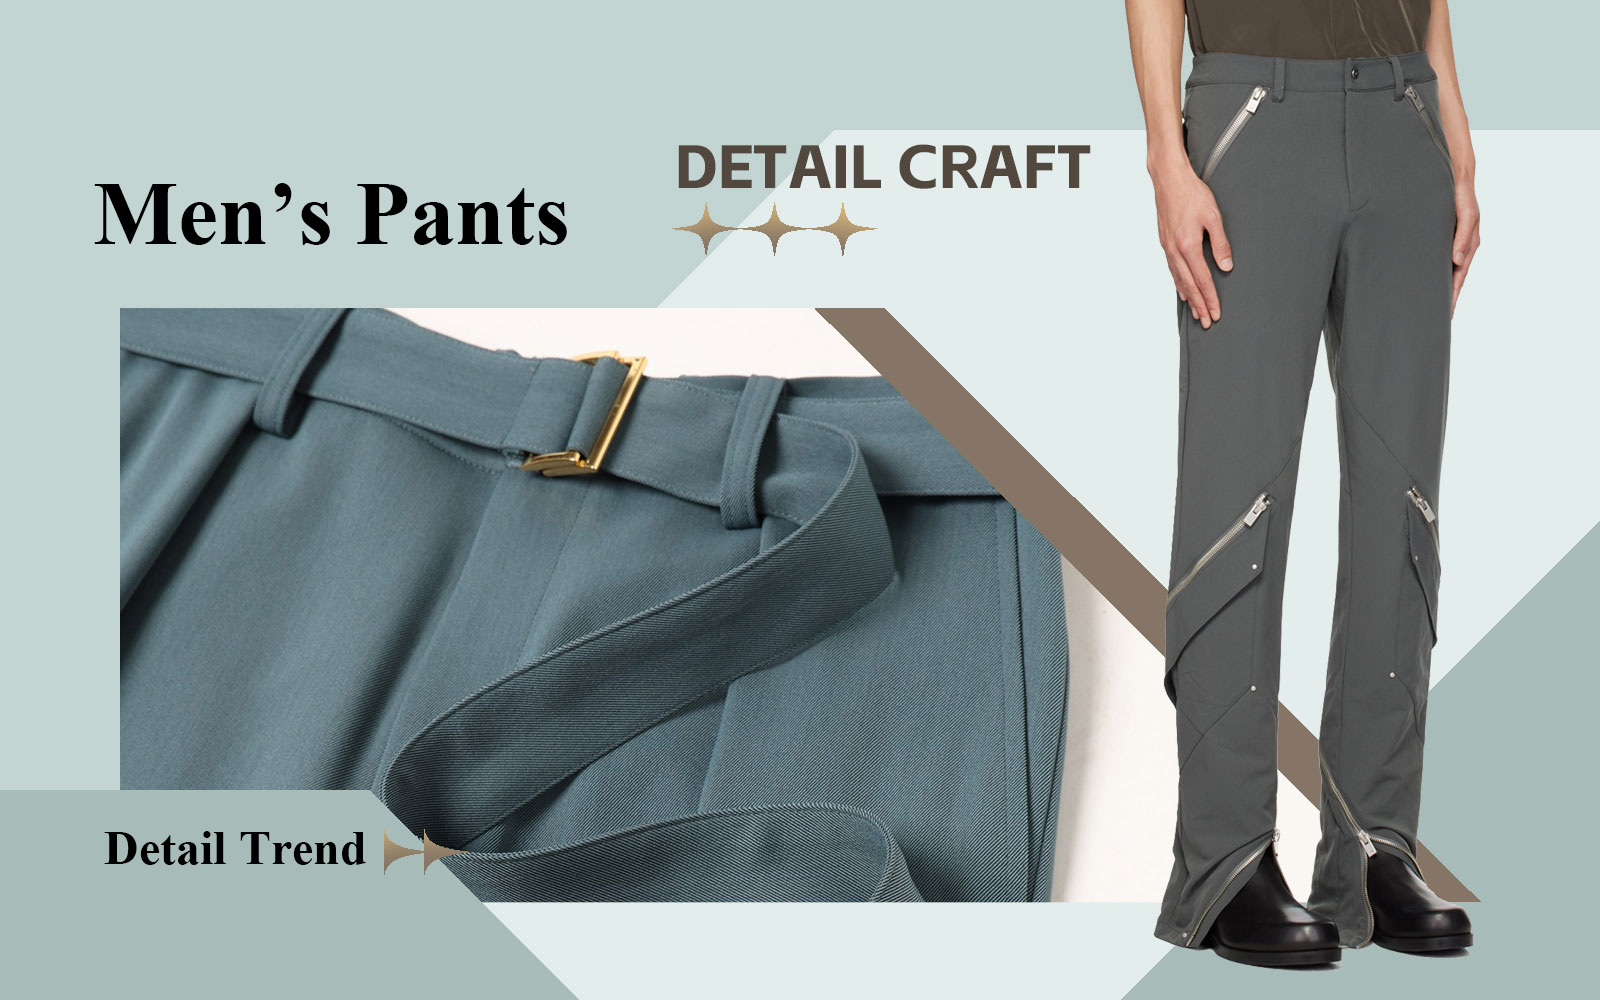 Urban Casual -- The Detail & Craft Trend for Men's Pants